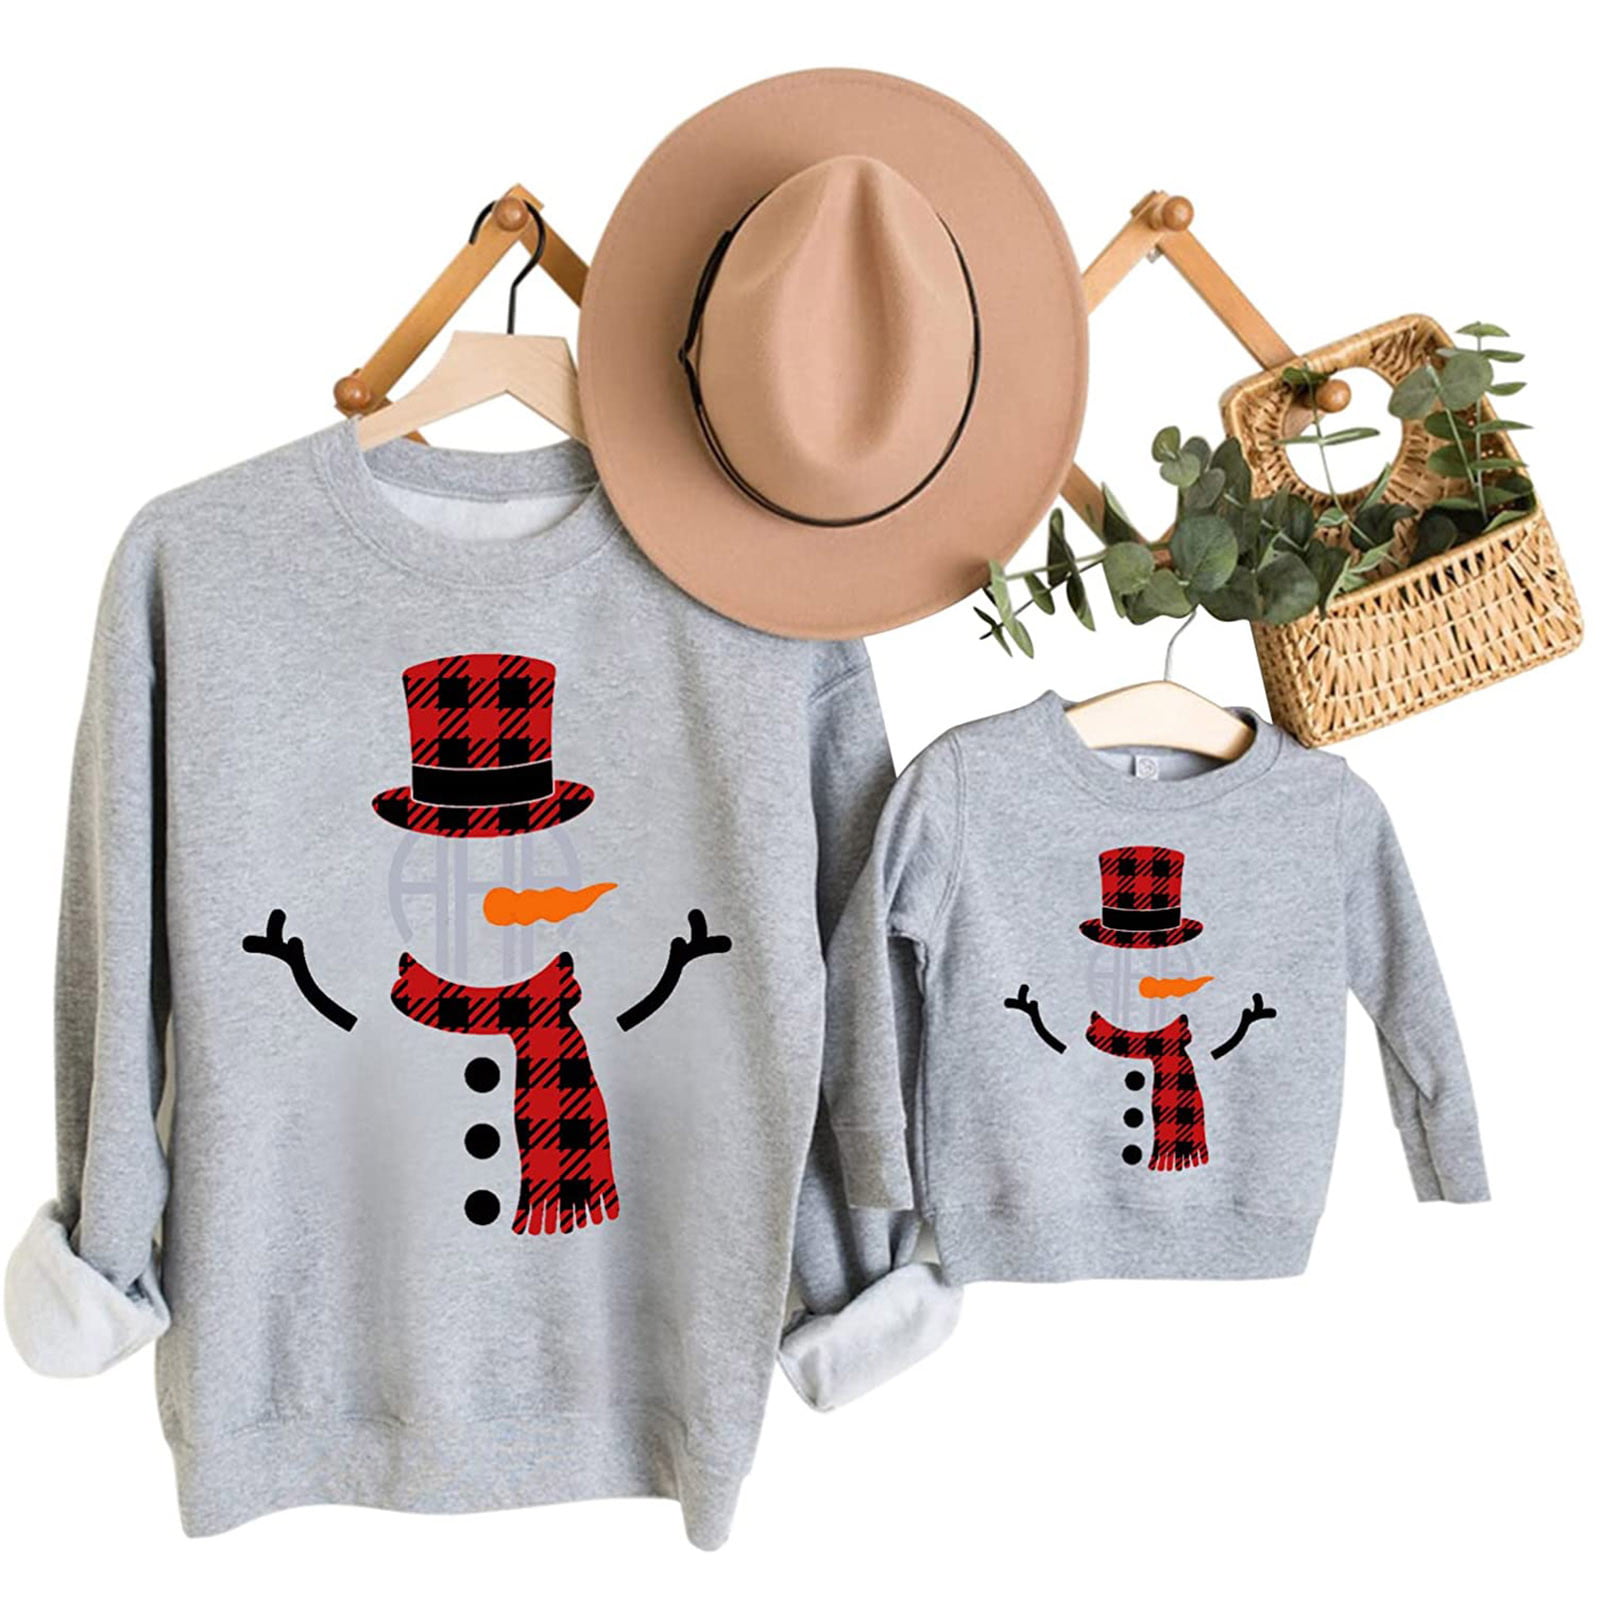 ZCFZJW Merry Christmas Matching Sweatshirts for Family Parent-child ...